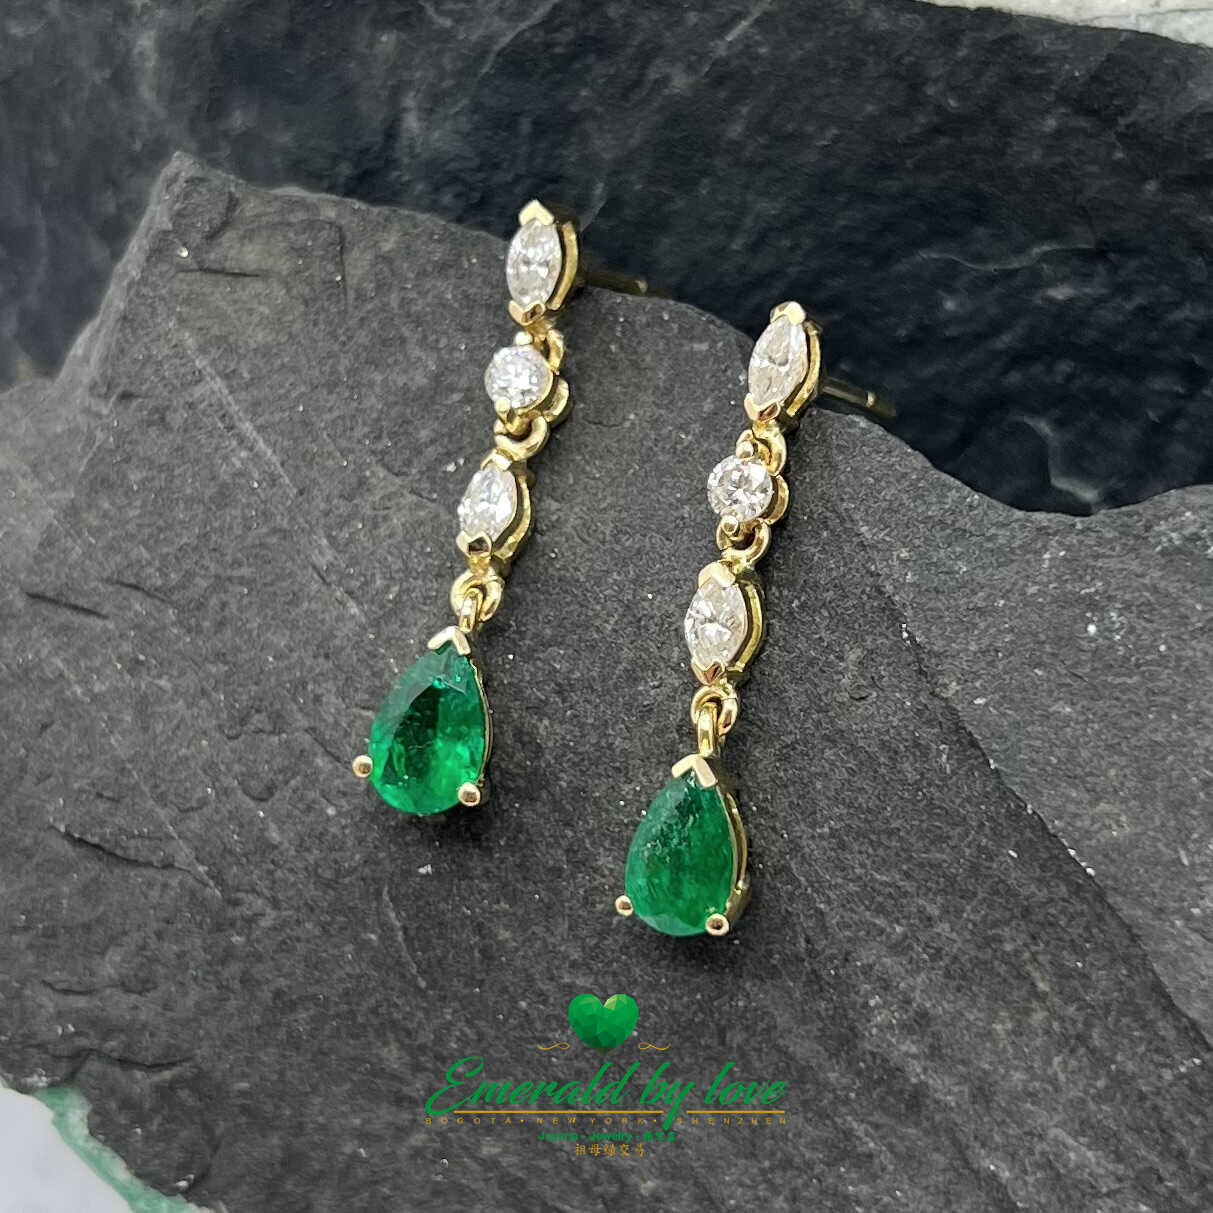 Gilded Harmony: 18K Yellow Gold Earrings with 1.35 TCW Pear-shaped Emeralds - Diamonds